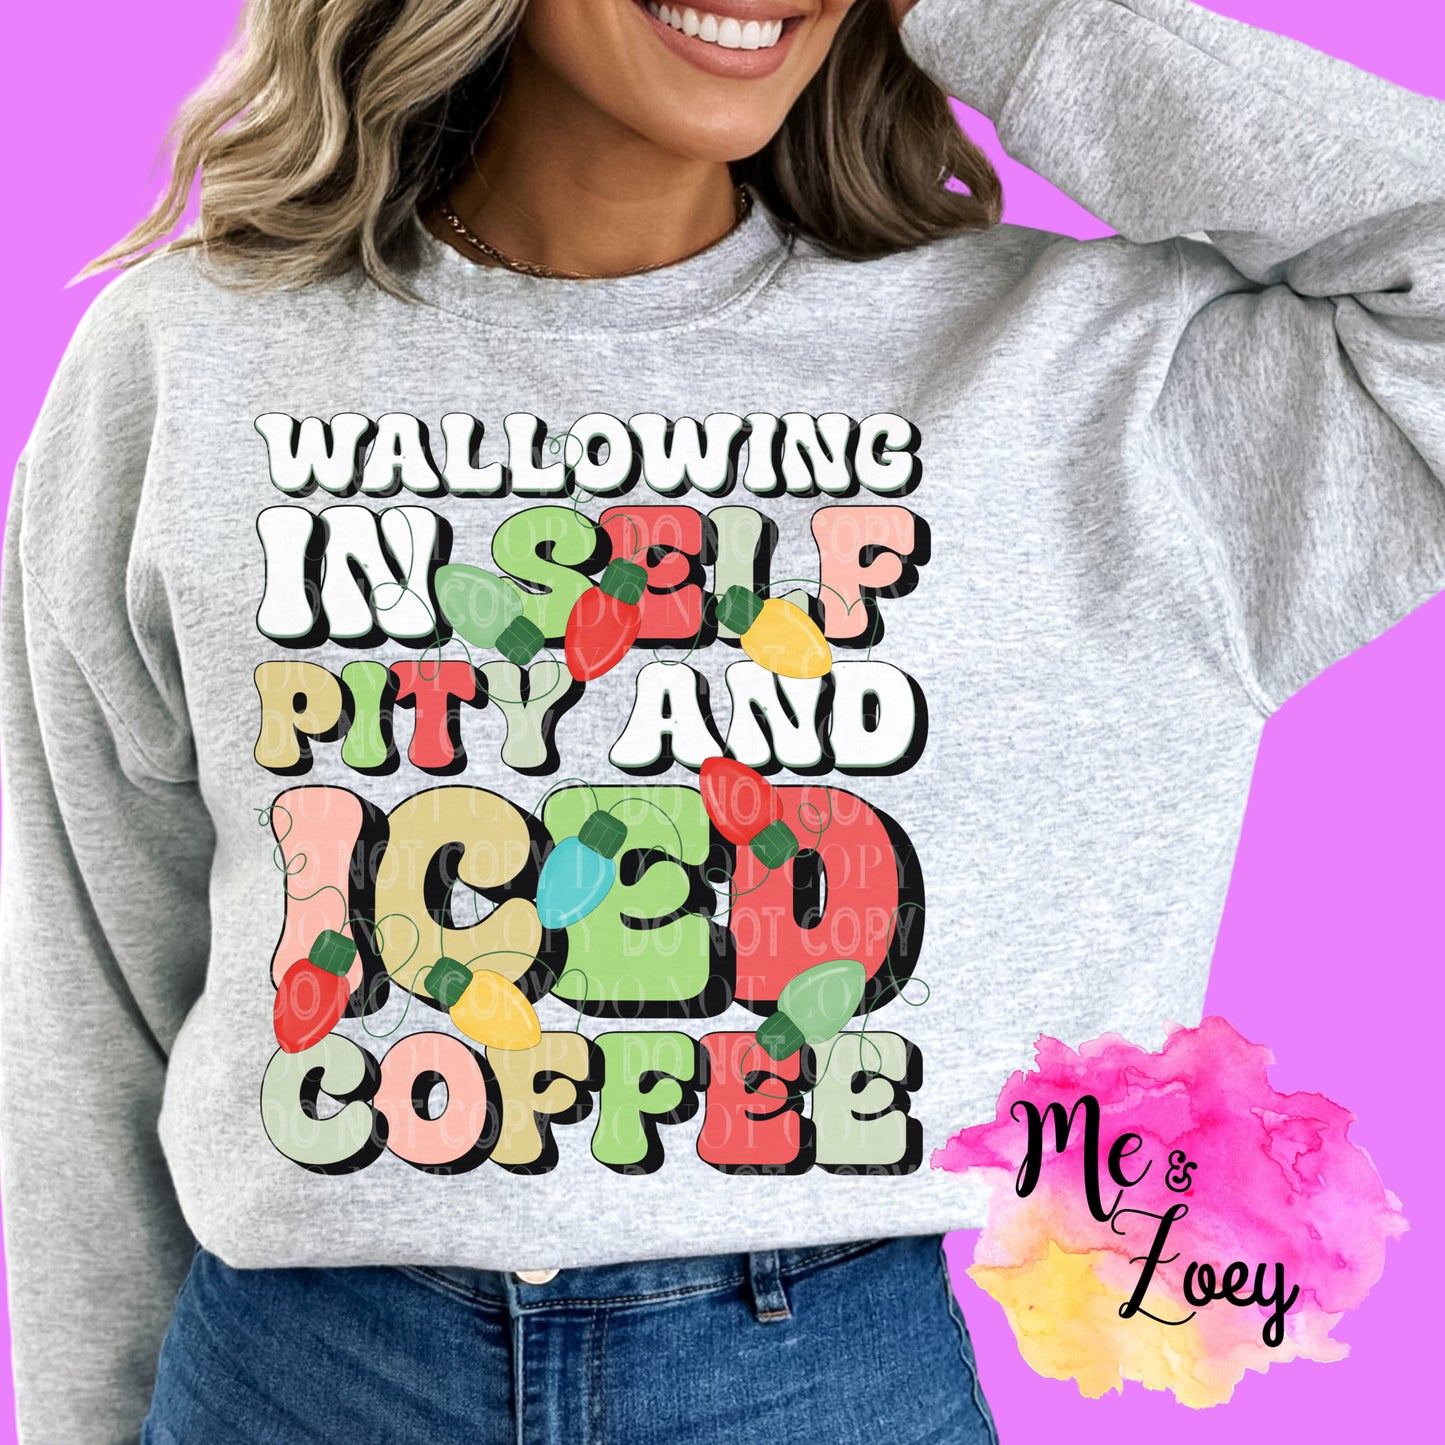 Self Pity And Iced Coffee Graphic Sweatshirt - MeAndZoey